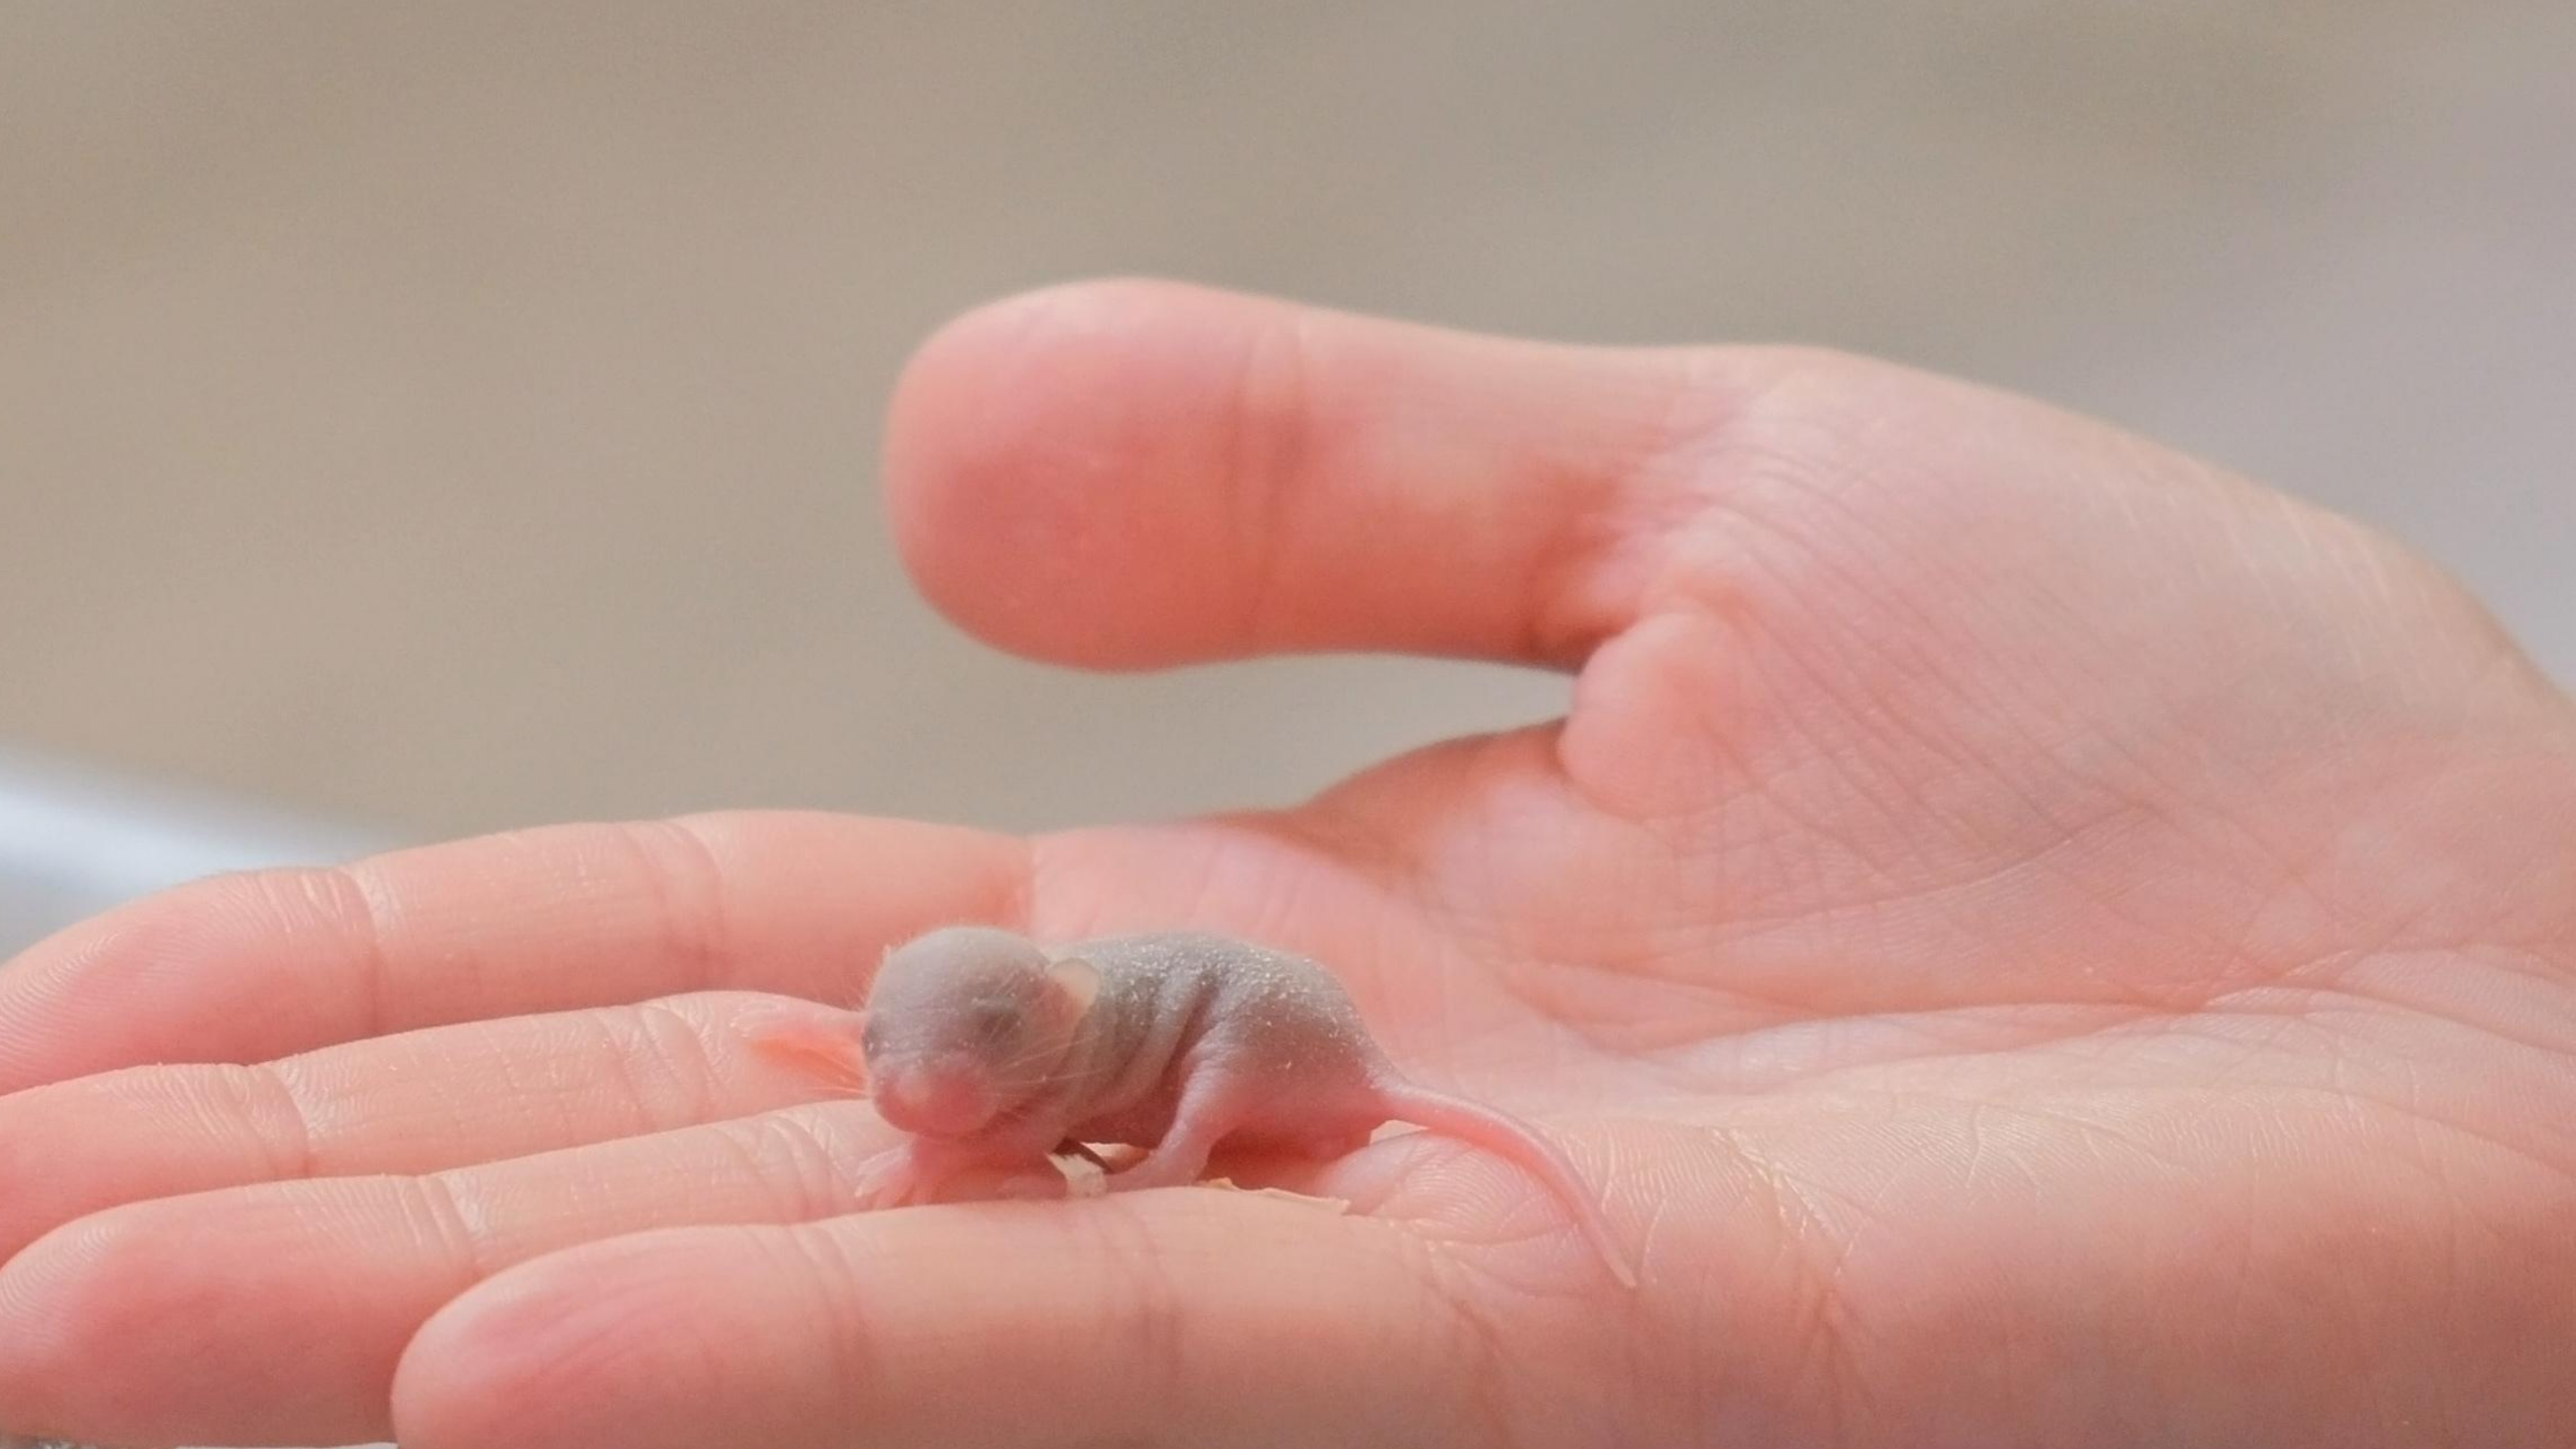 A baby mouse, its skin pink and translucent, curls up in a person's open palm